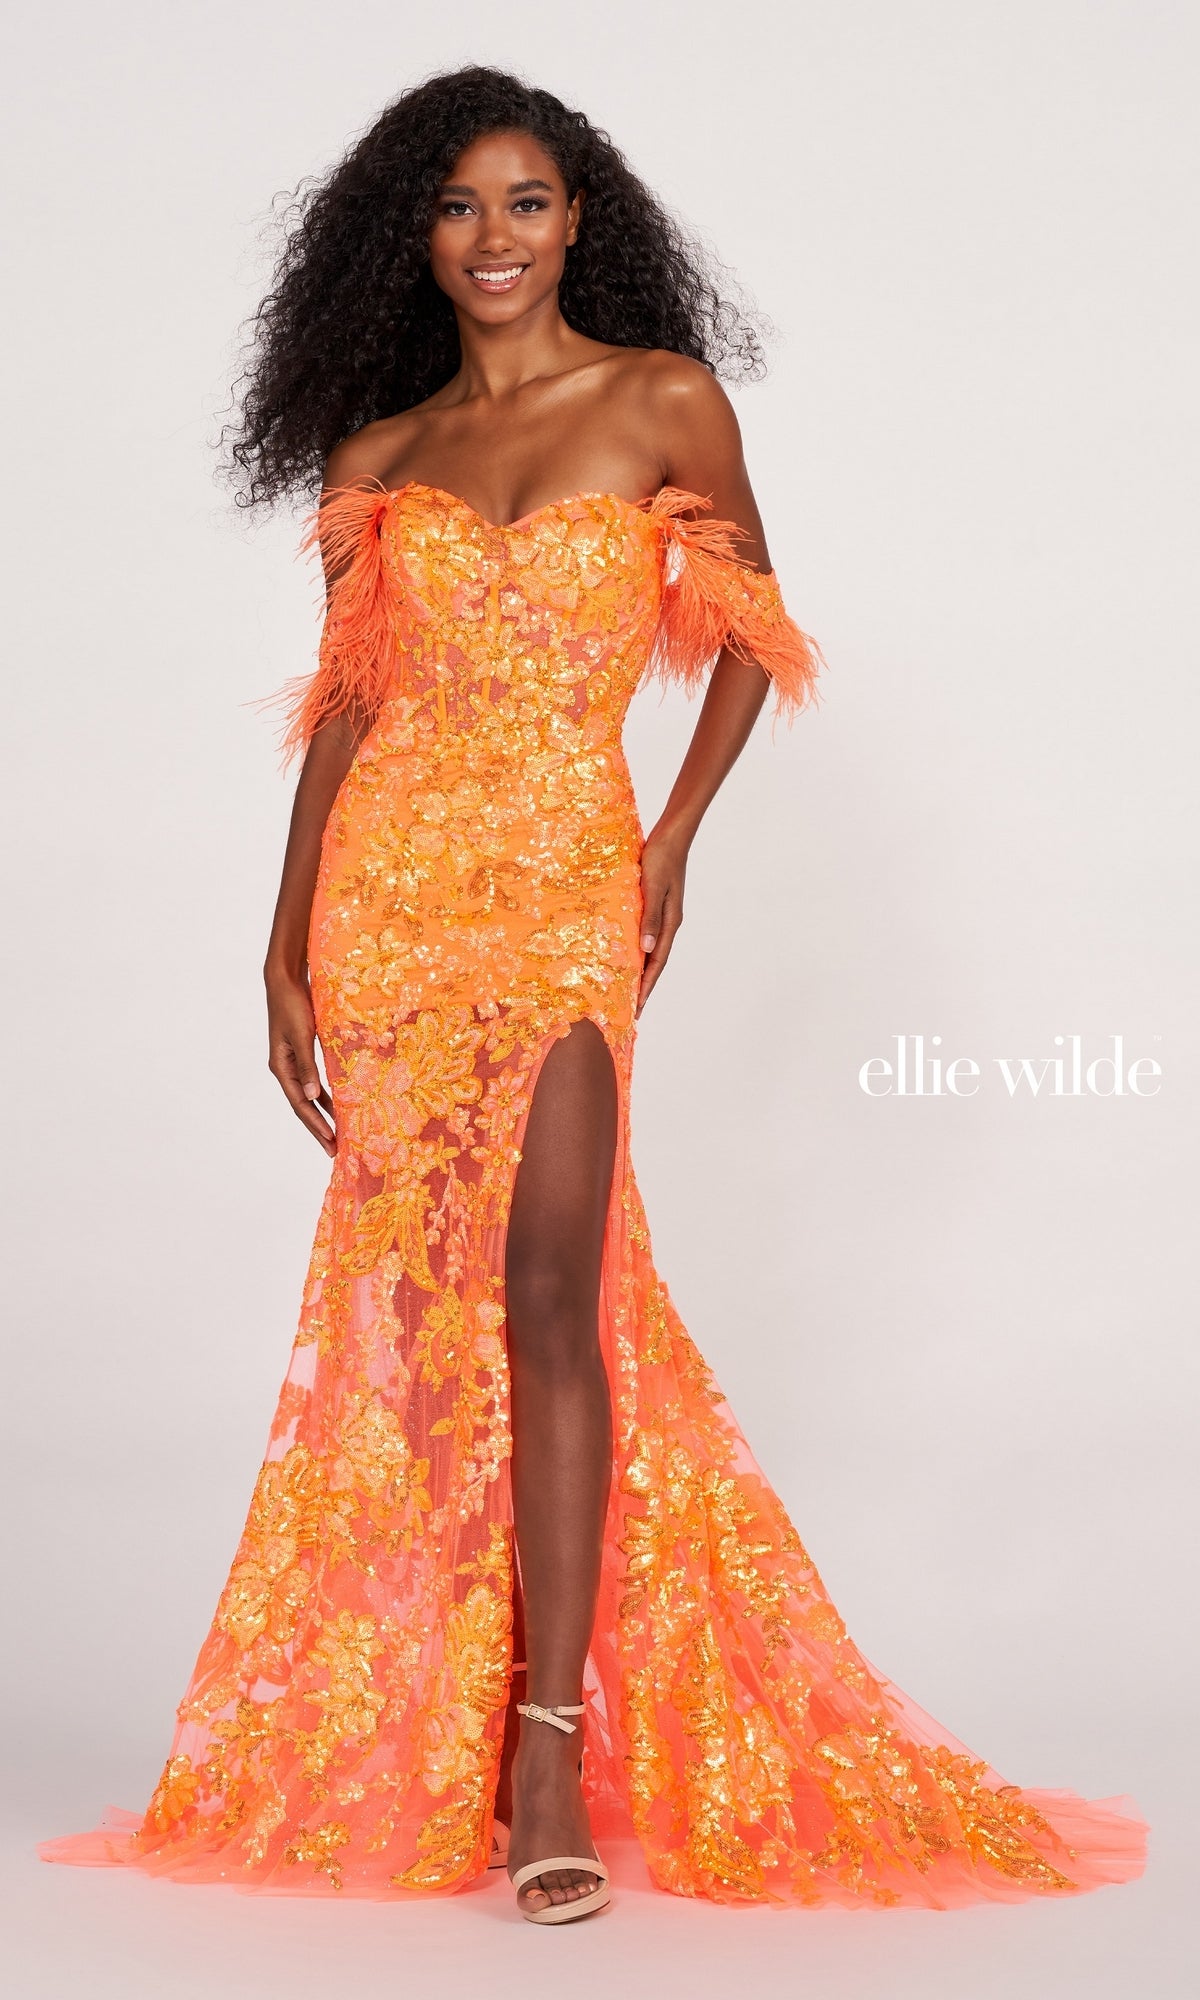 Off-Shoulder Feathered Sequin Prom Dress - PromGirl